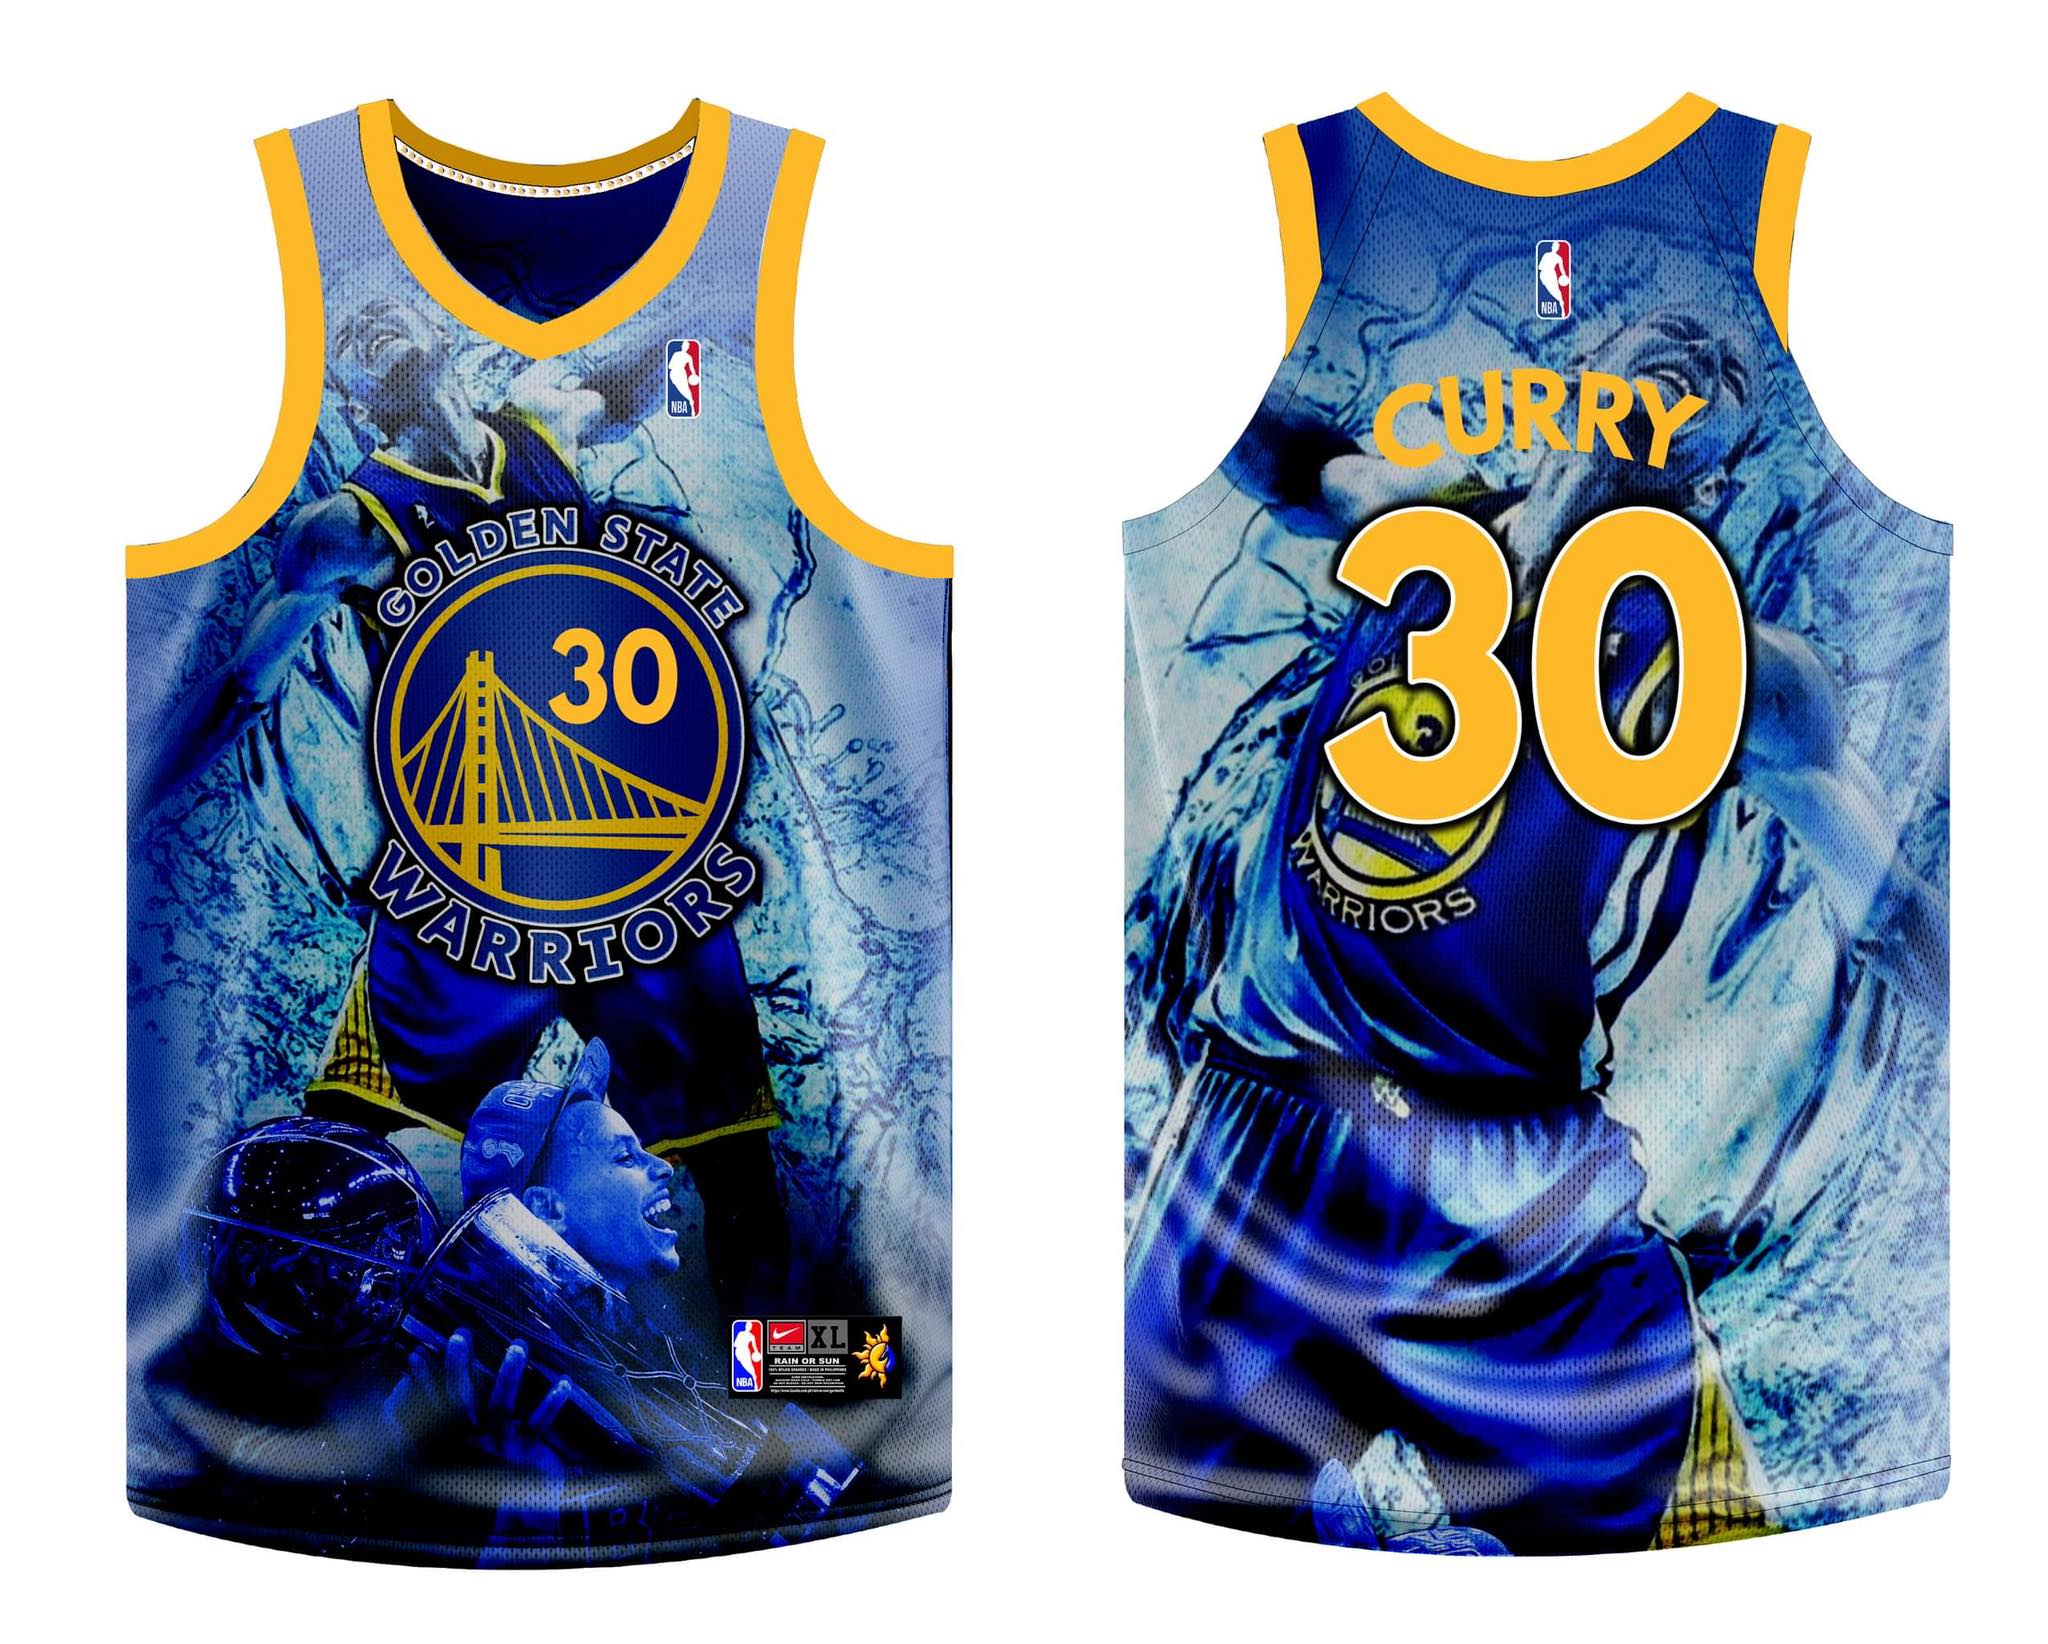 FREE CUSTOMIZE OF NAME AND NUMBER ONLY GSW 02 CURRY JERSEY full sublimation high quality fabrics basketball jersey/ jersey/ player jersey | Lazada